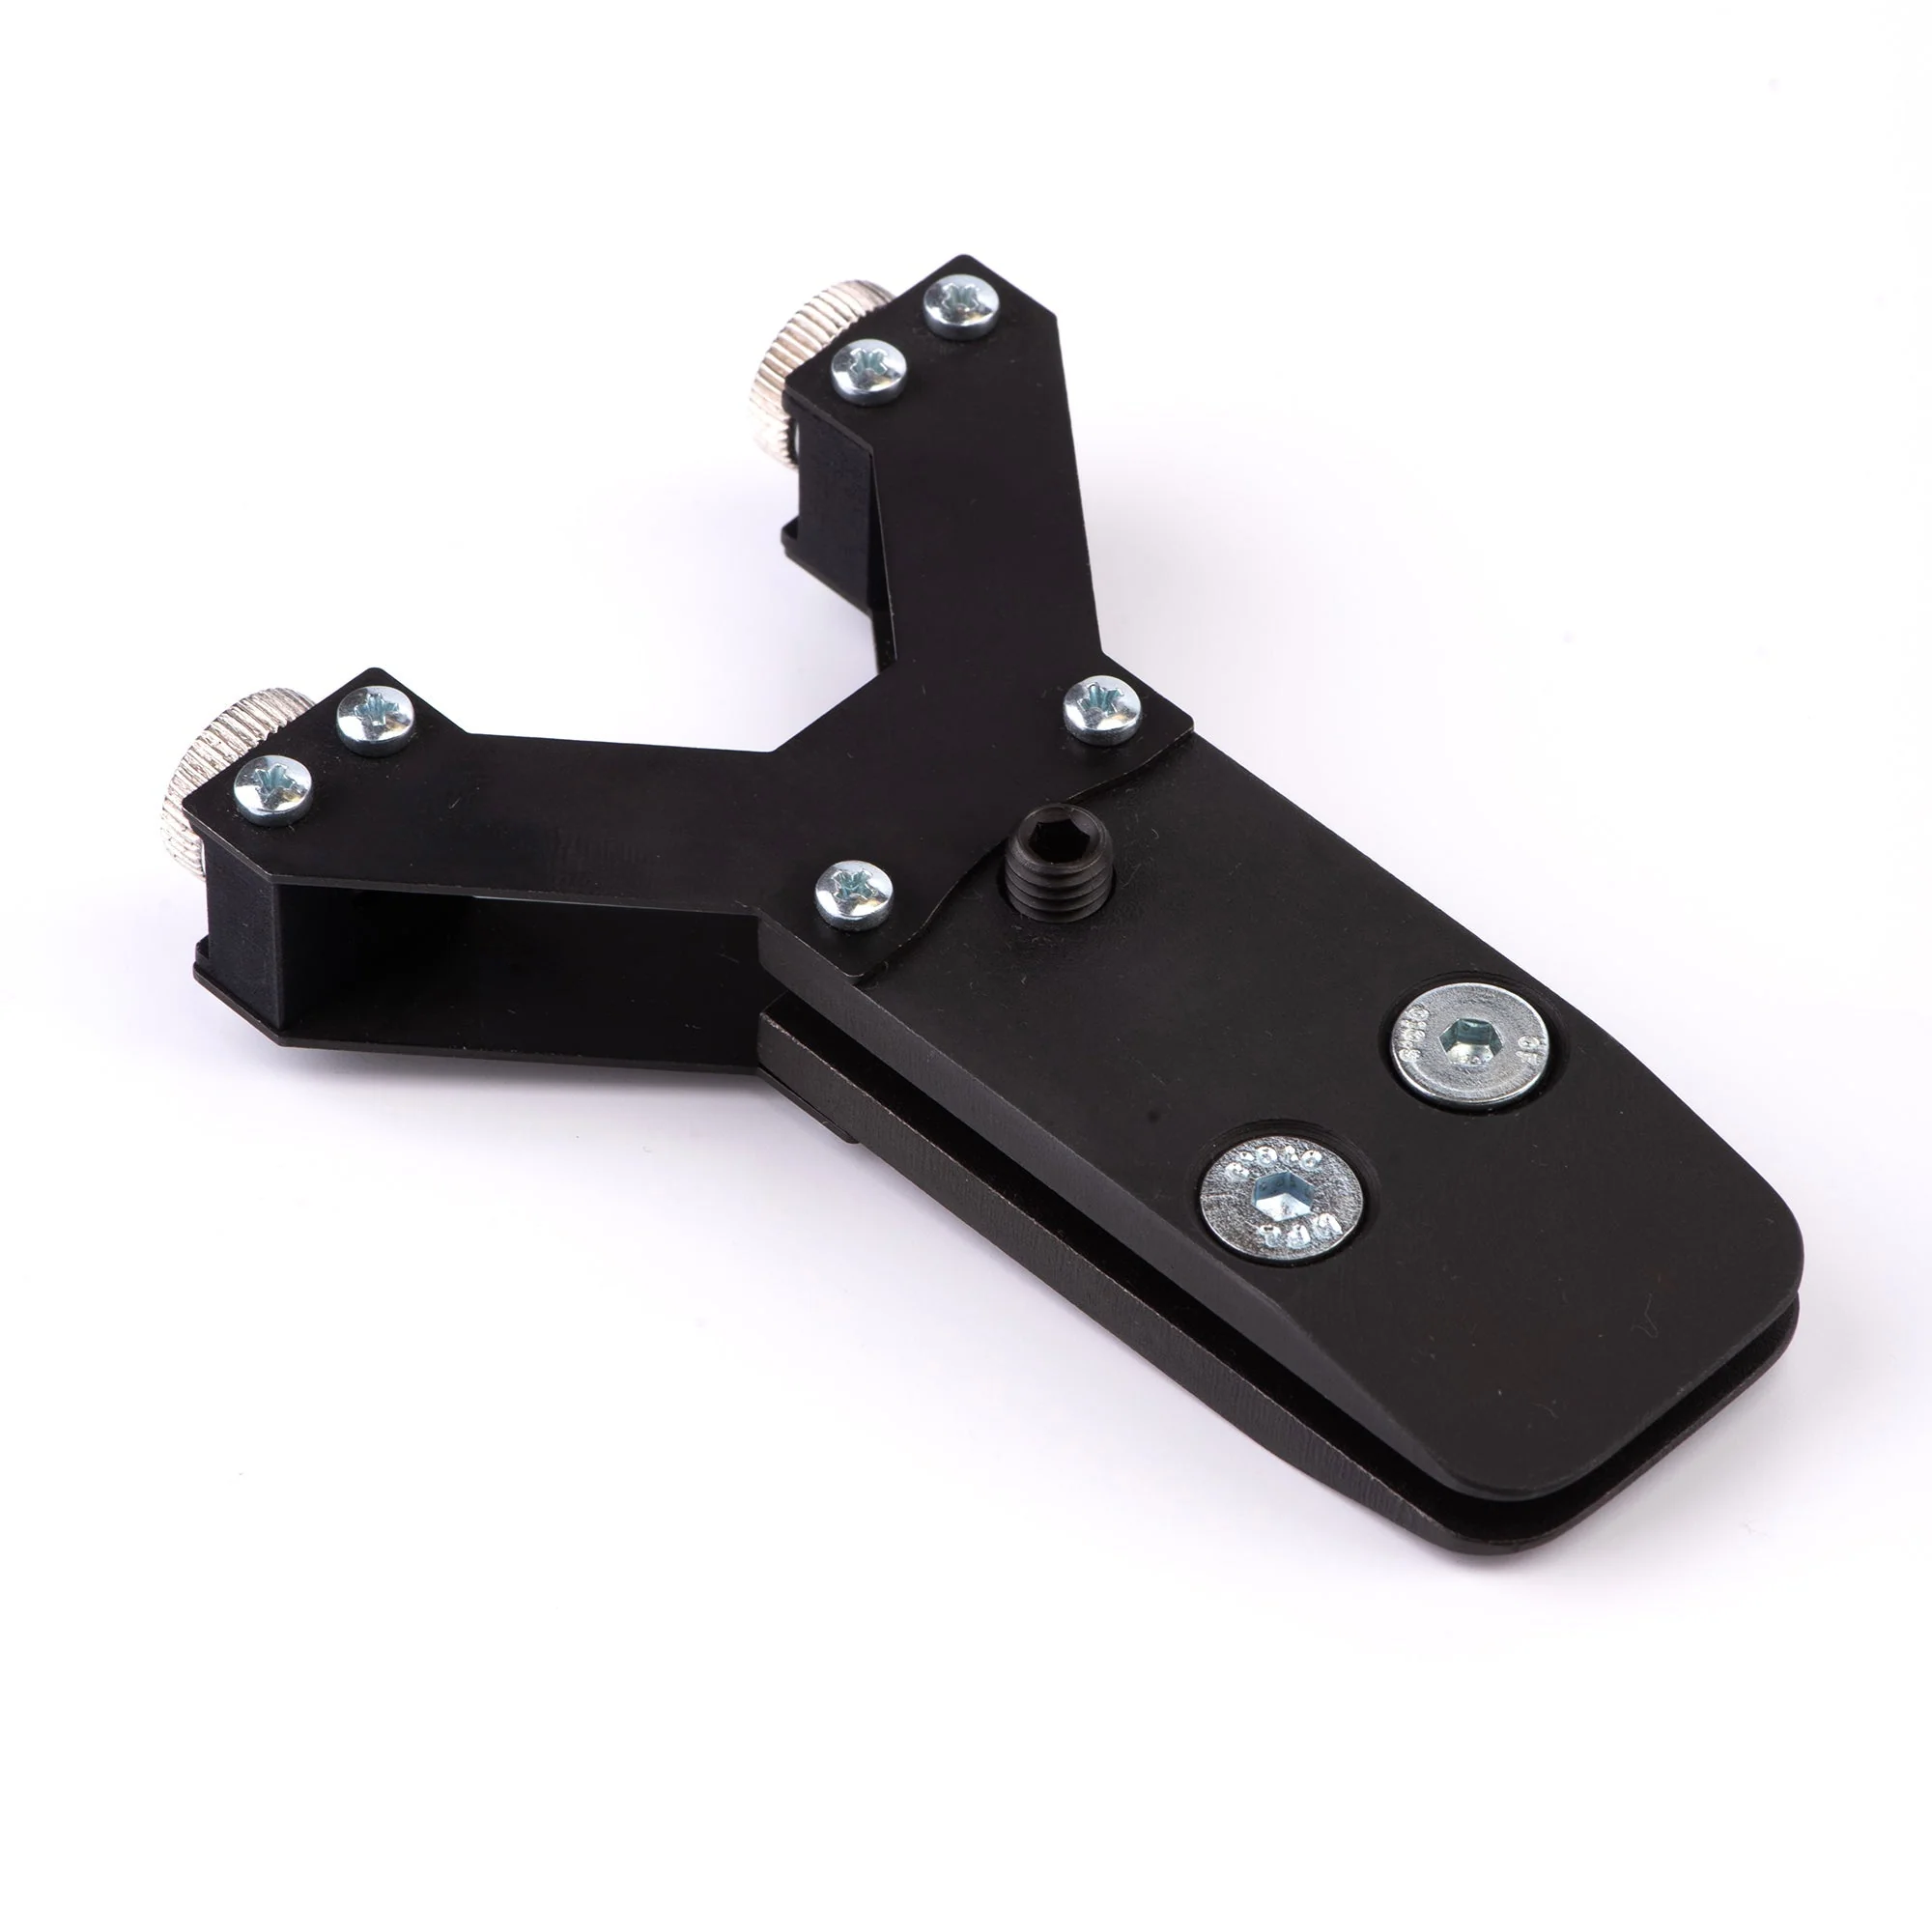 Can this clamp be used on the RS model?